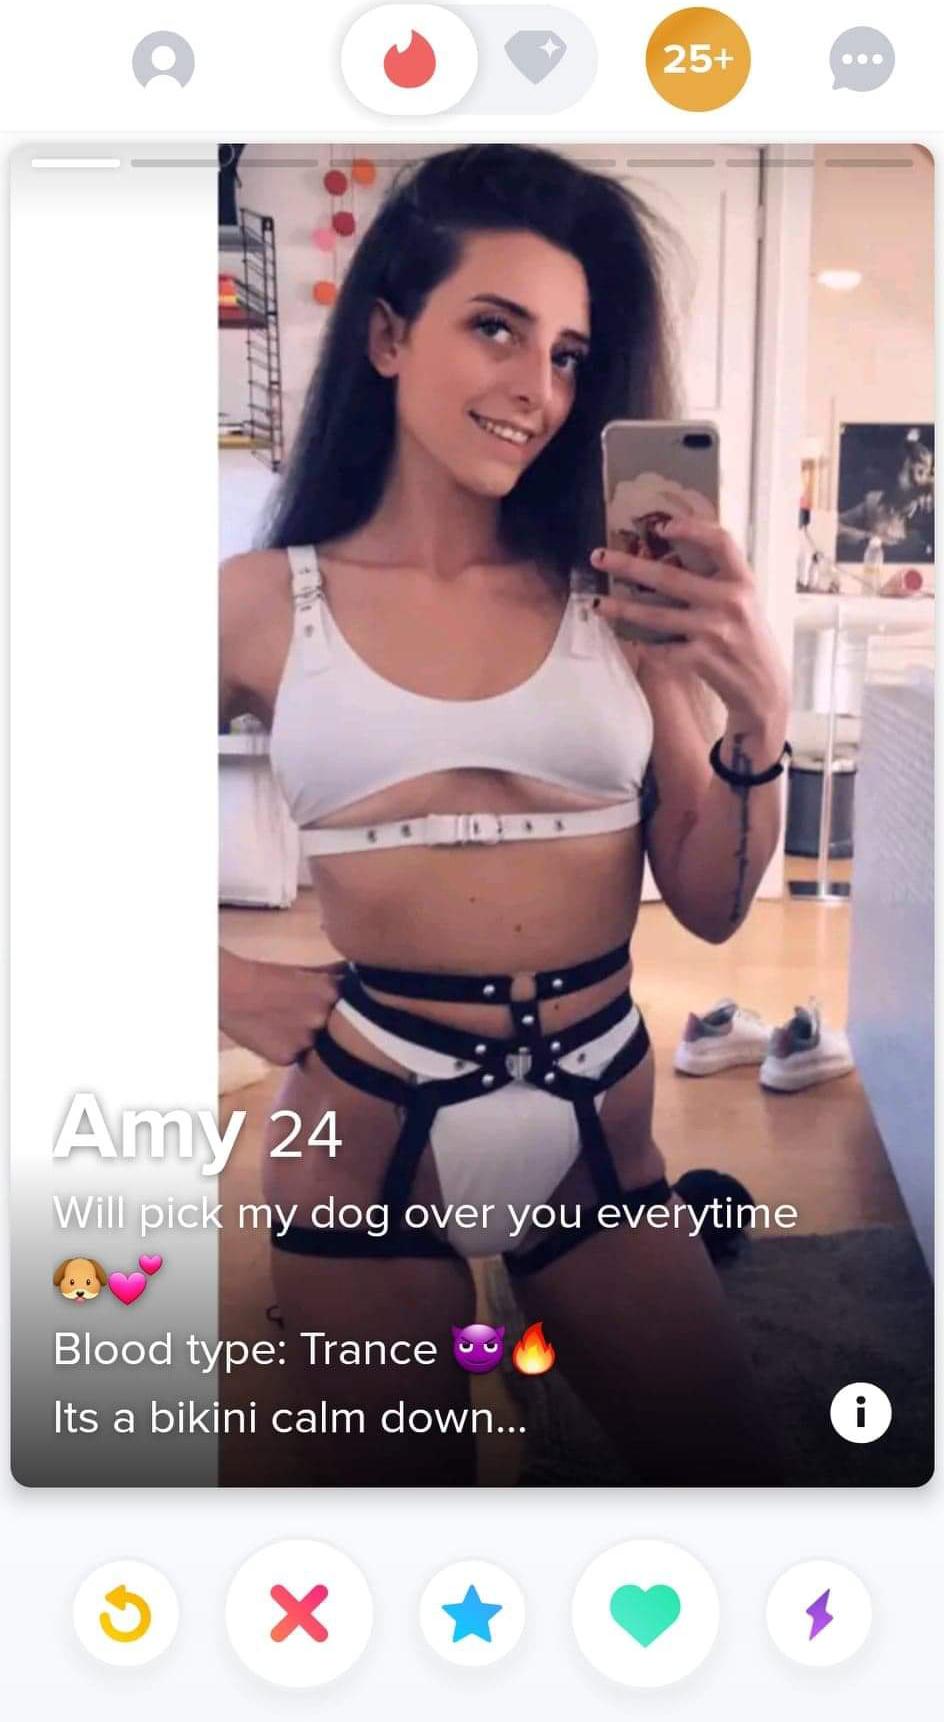 shameless tinder - Amy 24 Will pick my dog over you everytime Blood type Trance Its a bikini calm down...